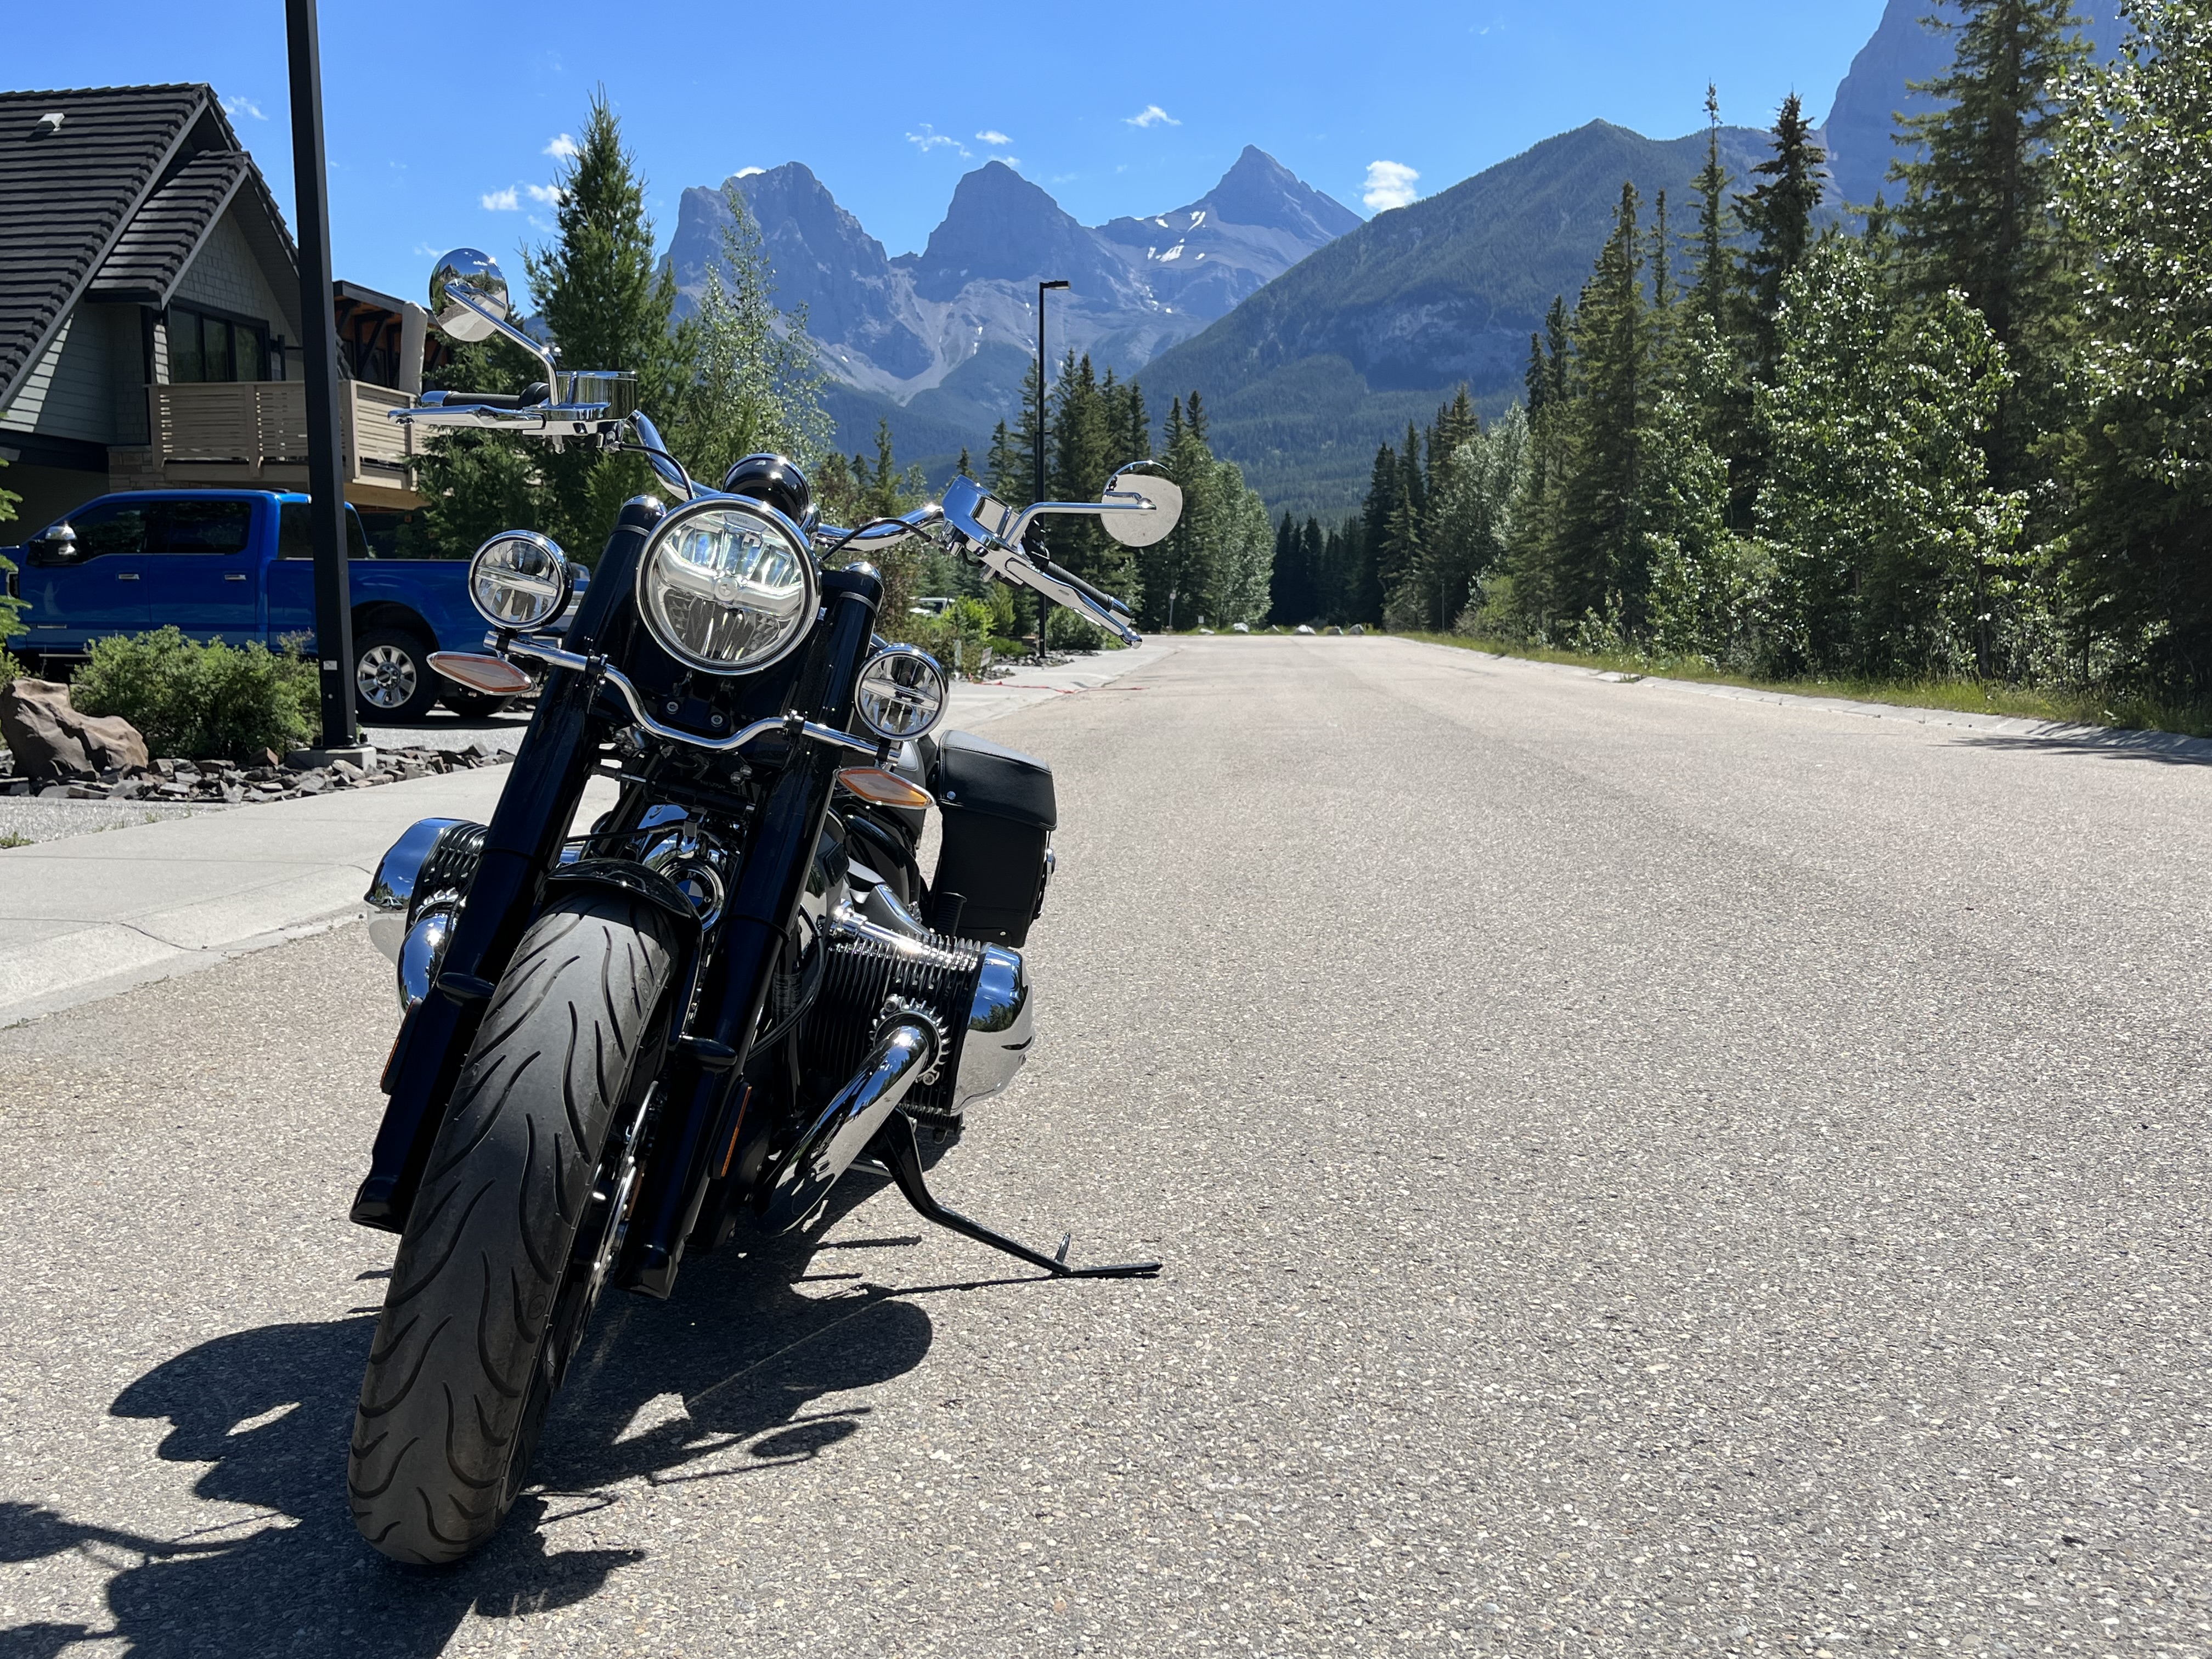 R 18 Classic and The Three Sisters, Alberta, Canada